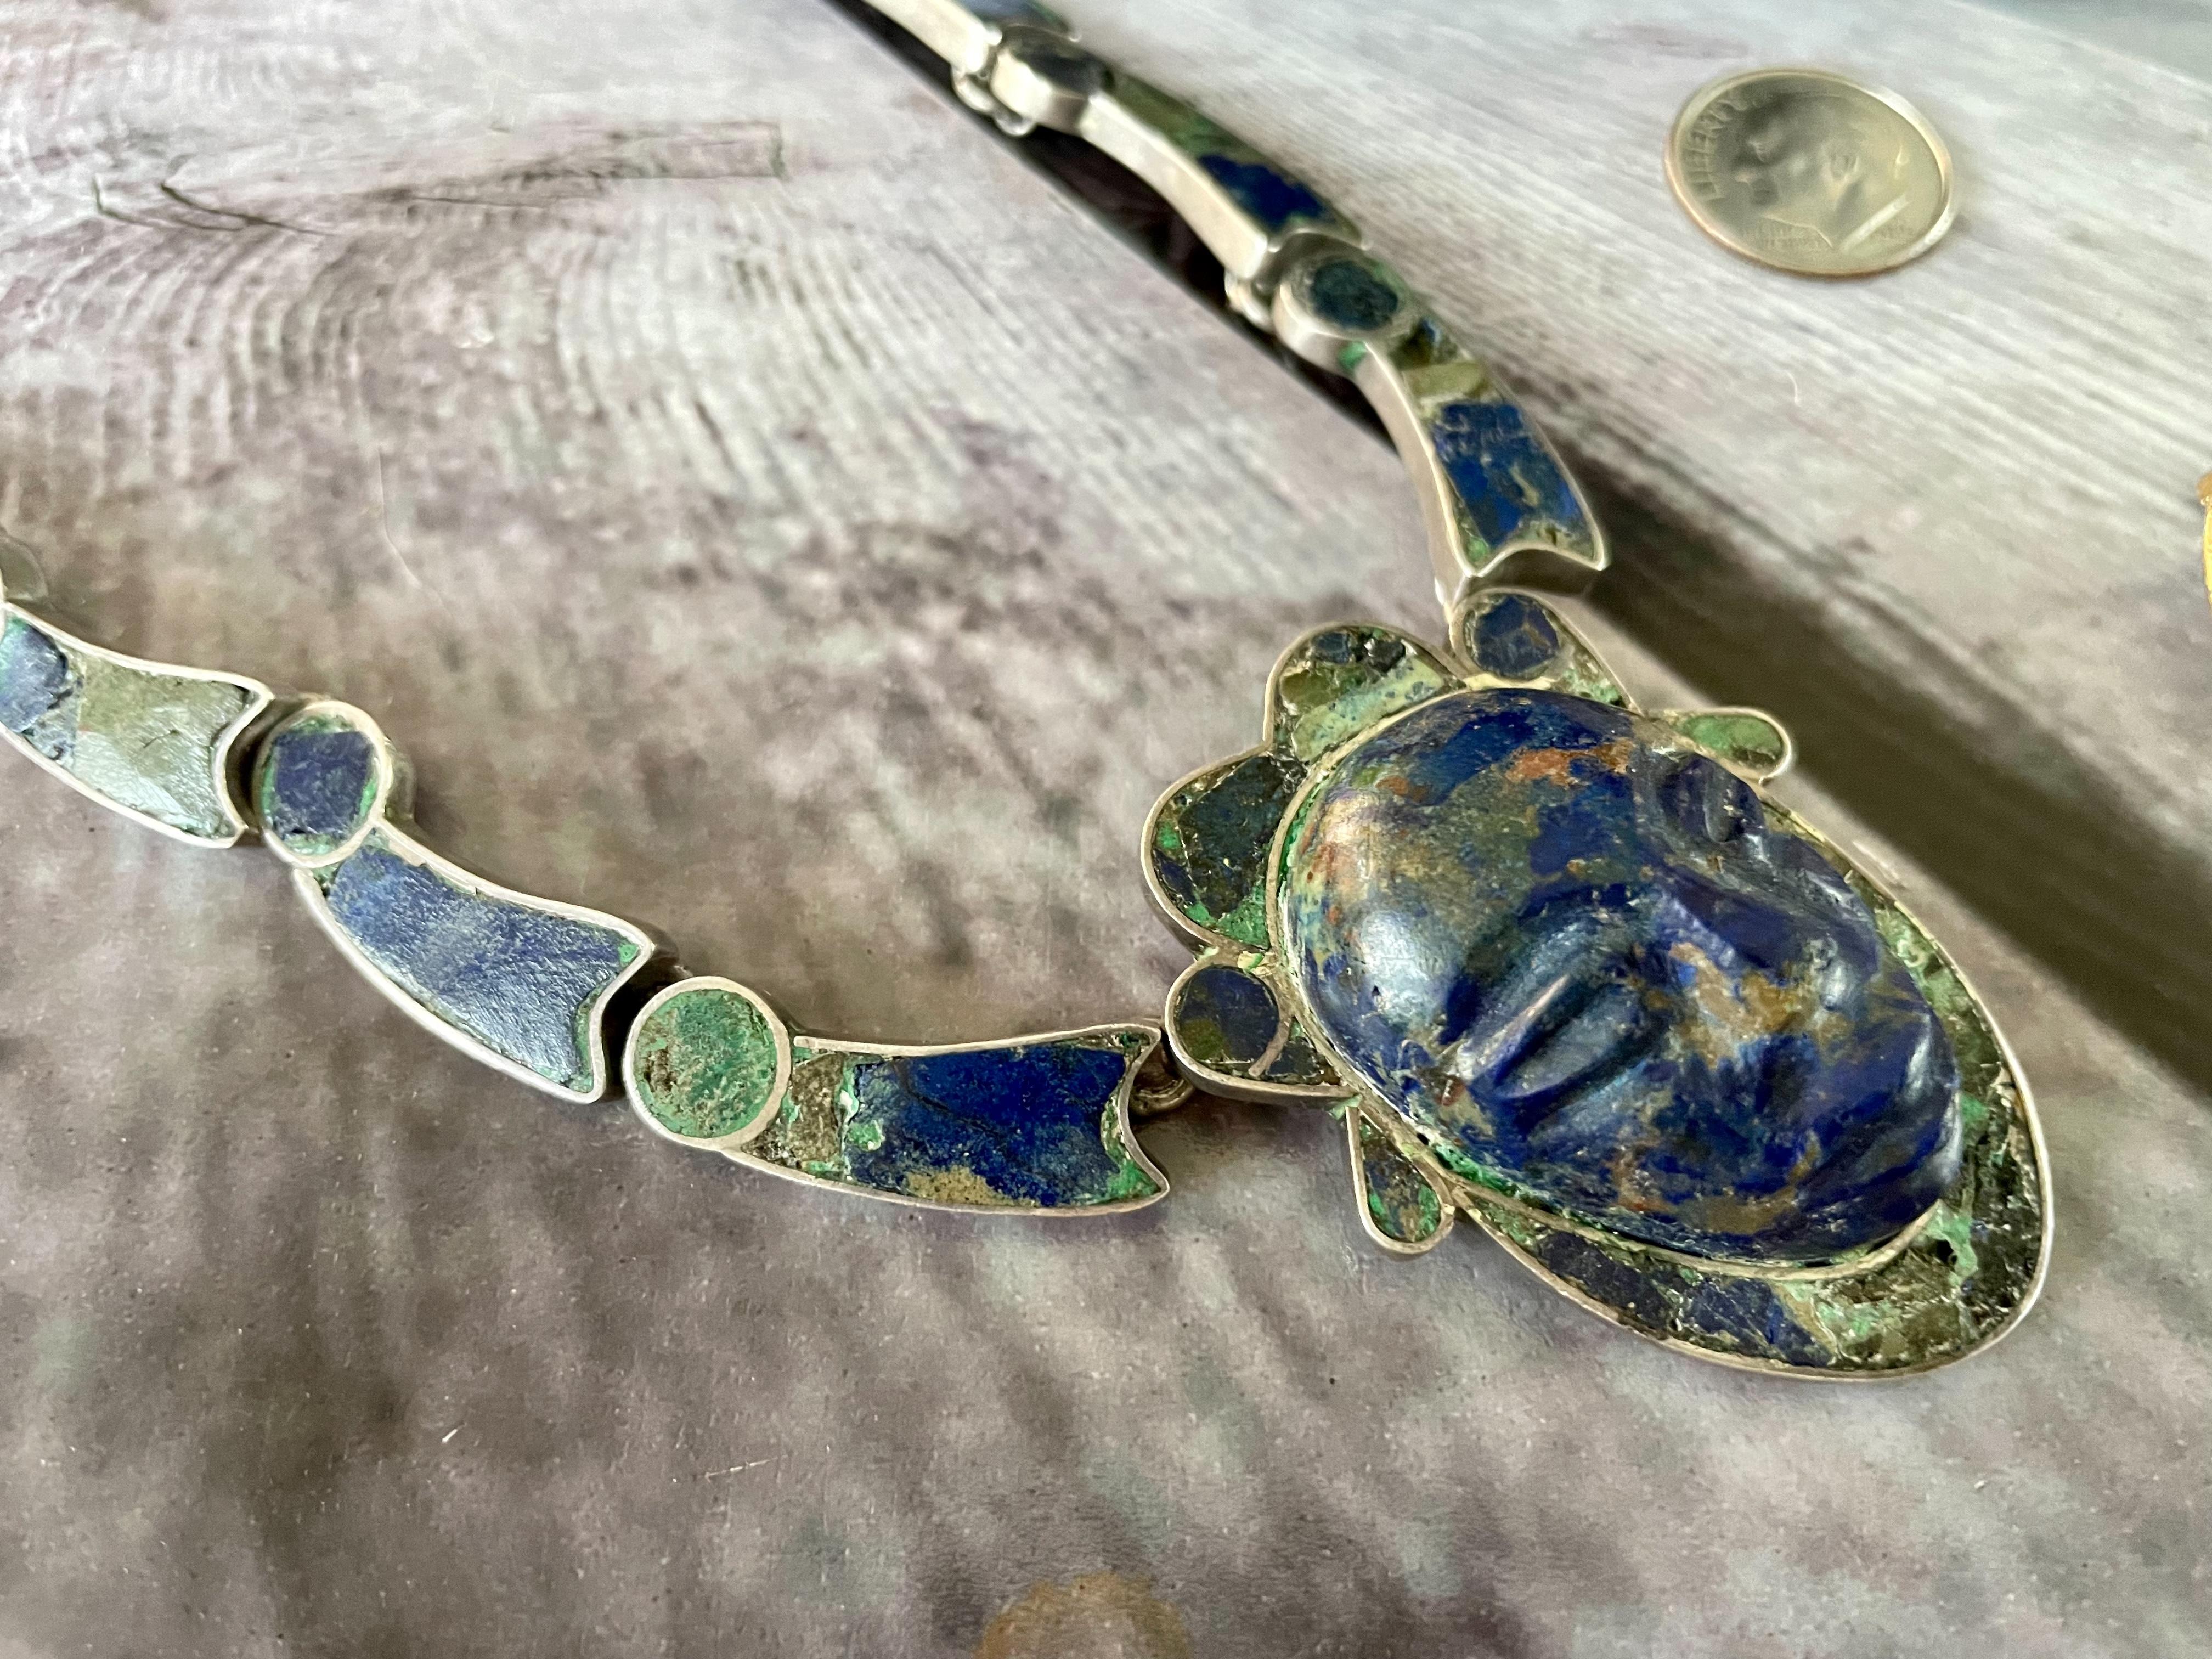 This vintage Taxco Necklace features inlay stone (perhaps Lapis and Turquoise) on a Sterling Silver necklace and pendant.  

The pendant resembles the head of a warrior!

Stamped: TAXCO 975 STERLING

Dimensions:
Chain 17